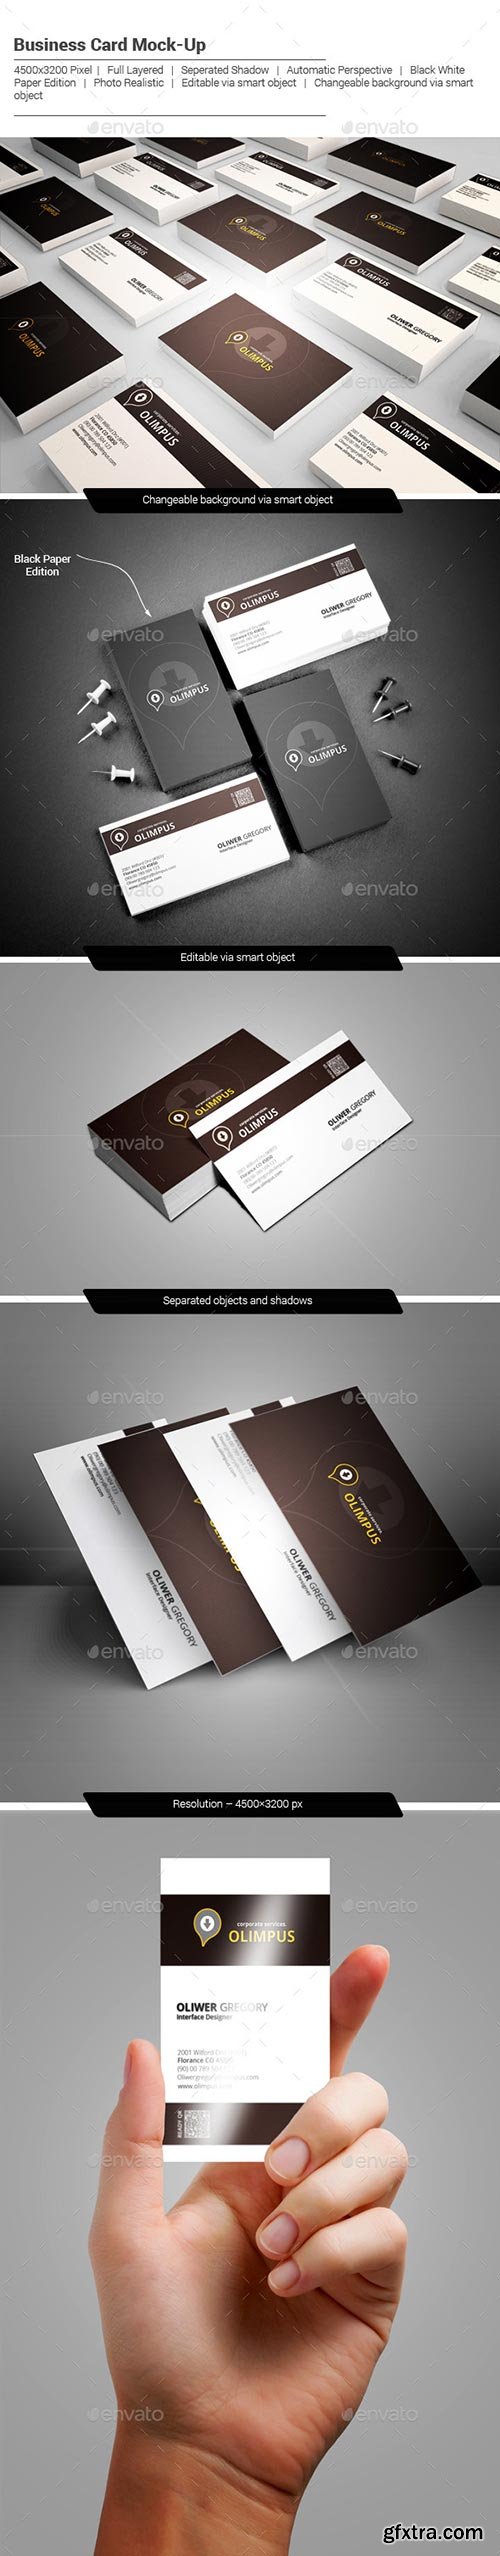 GraphicRiver - Photo Realistic / Business Card / Mock-Up 9959550